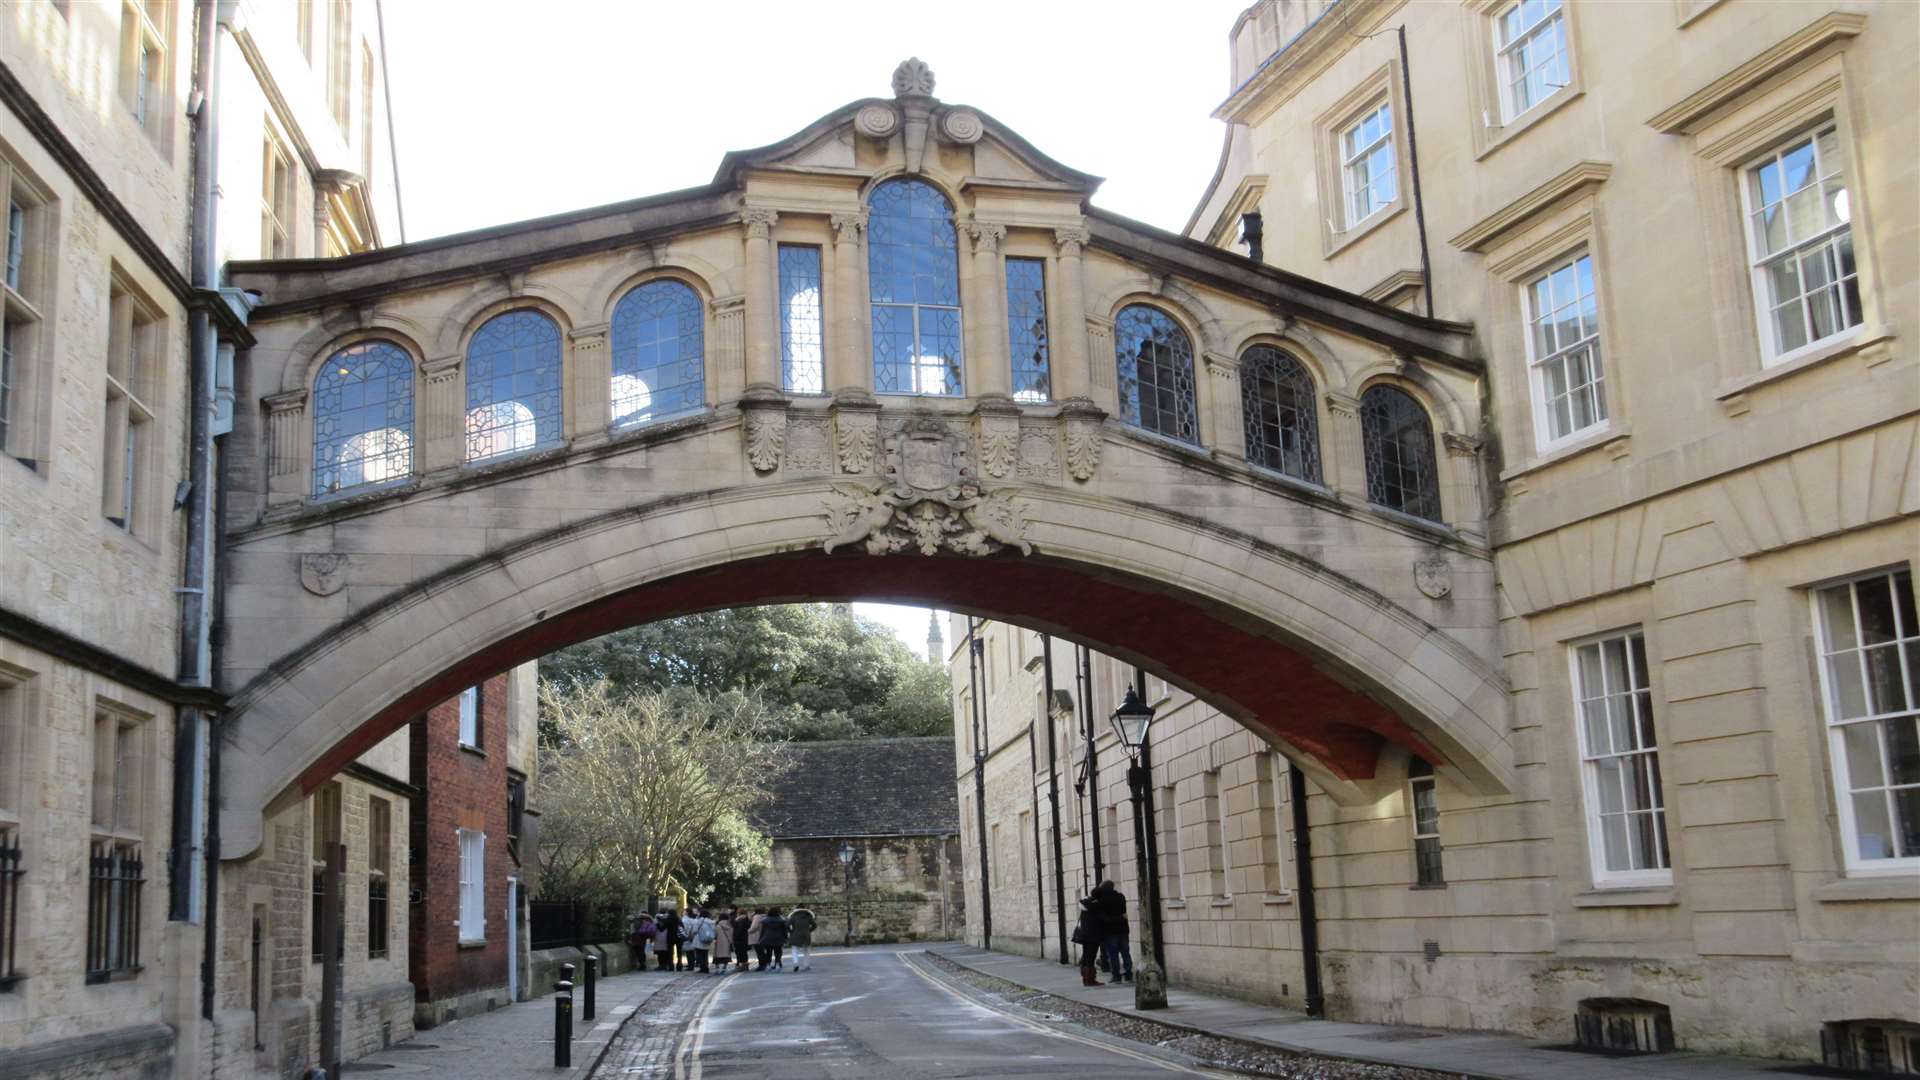 Oxford's very own Bridge of Sighs